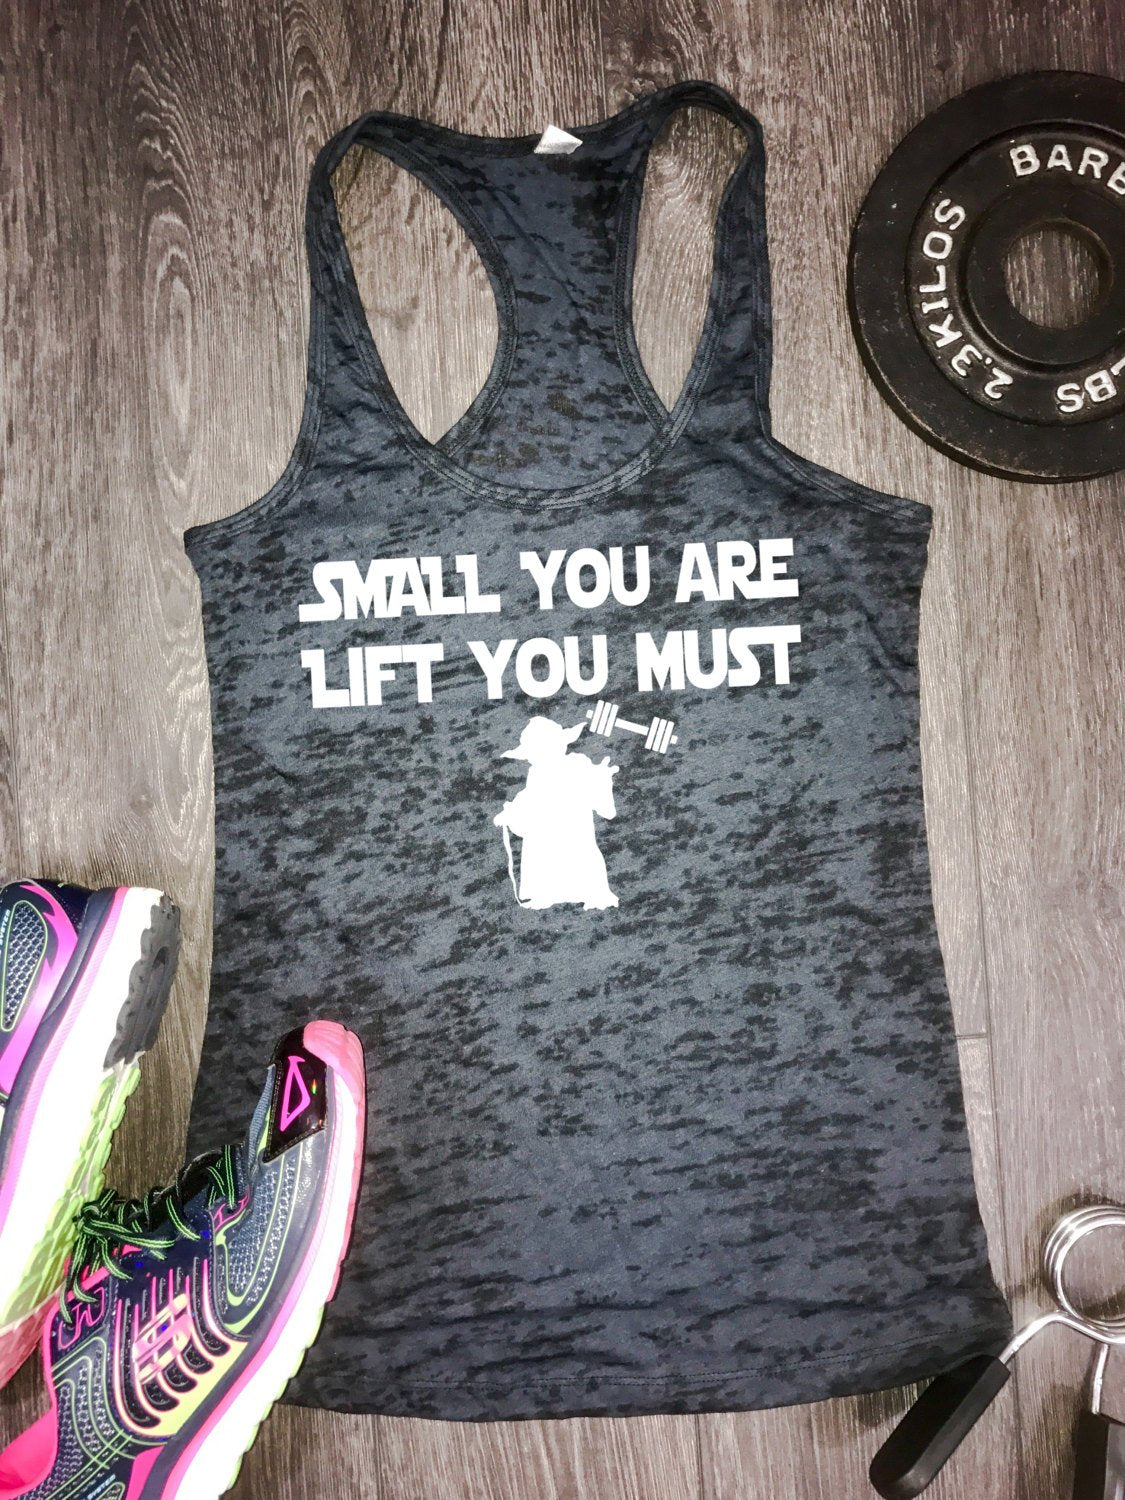 Small You Are Lift You Must, yoga tank, fitness tank, womens